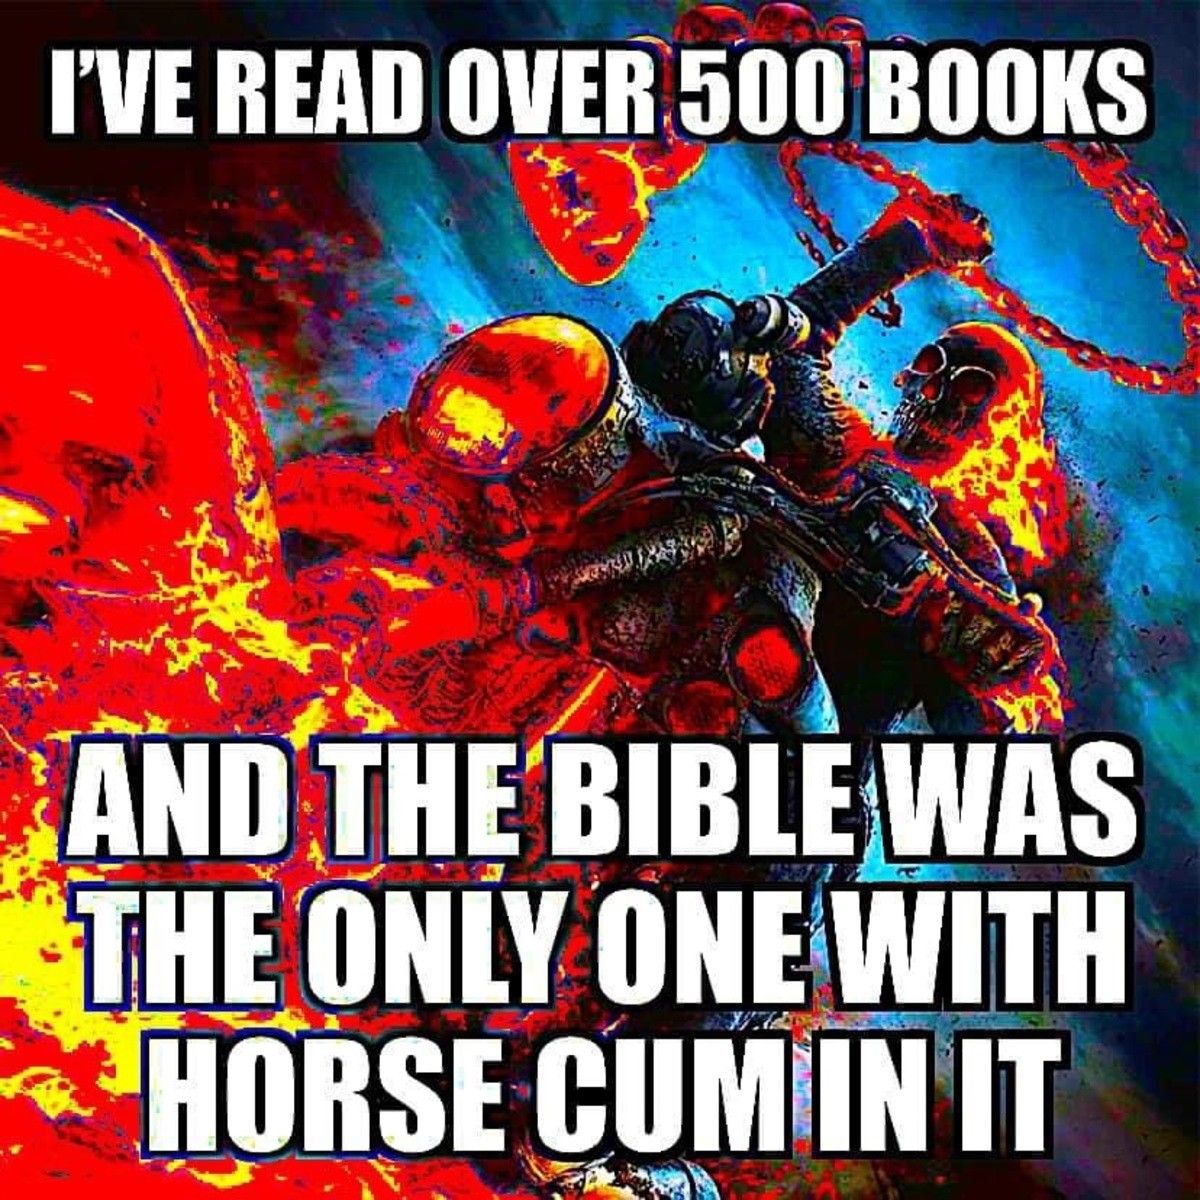 Technically it was only a refereence to horse cum. Ezekiel 23:20